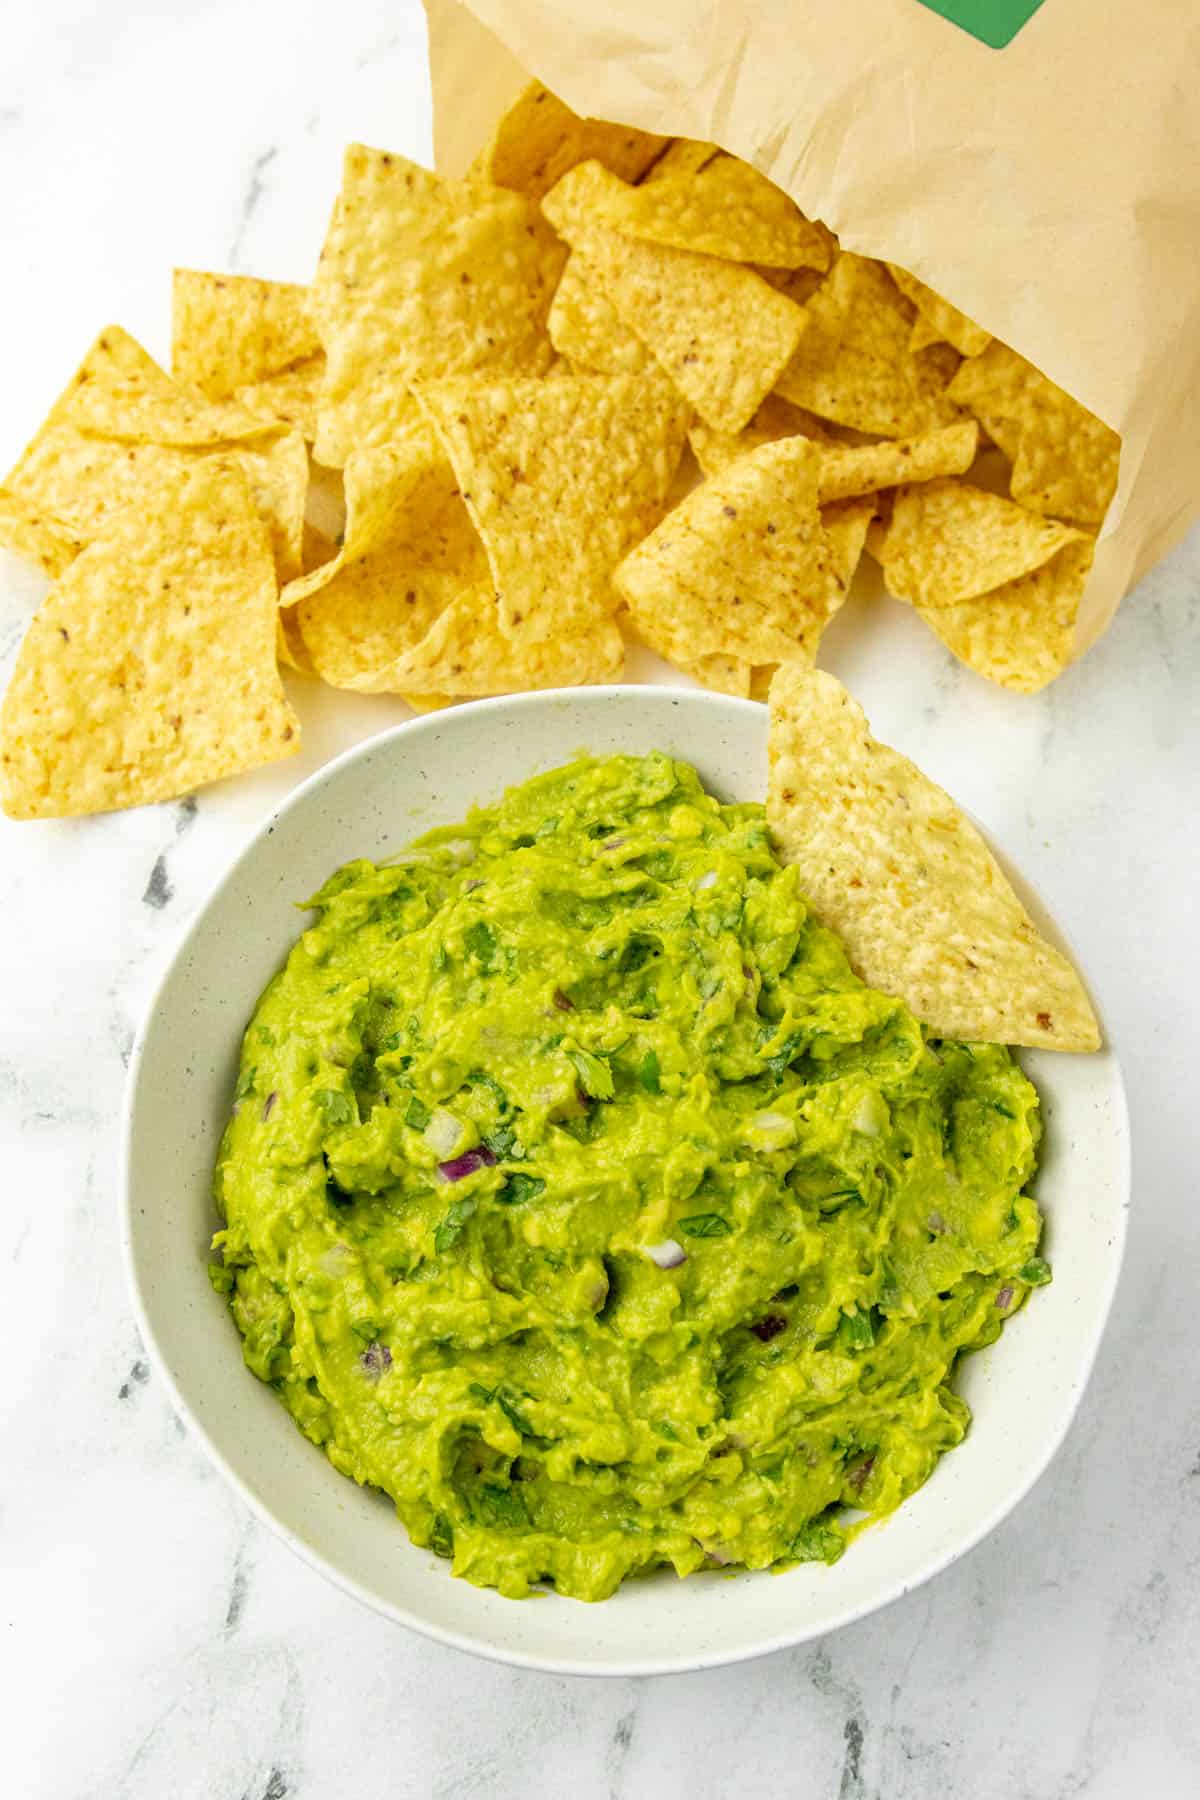 Guacamole with chips dipped in it